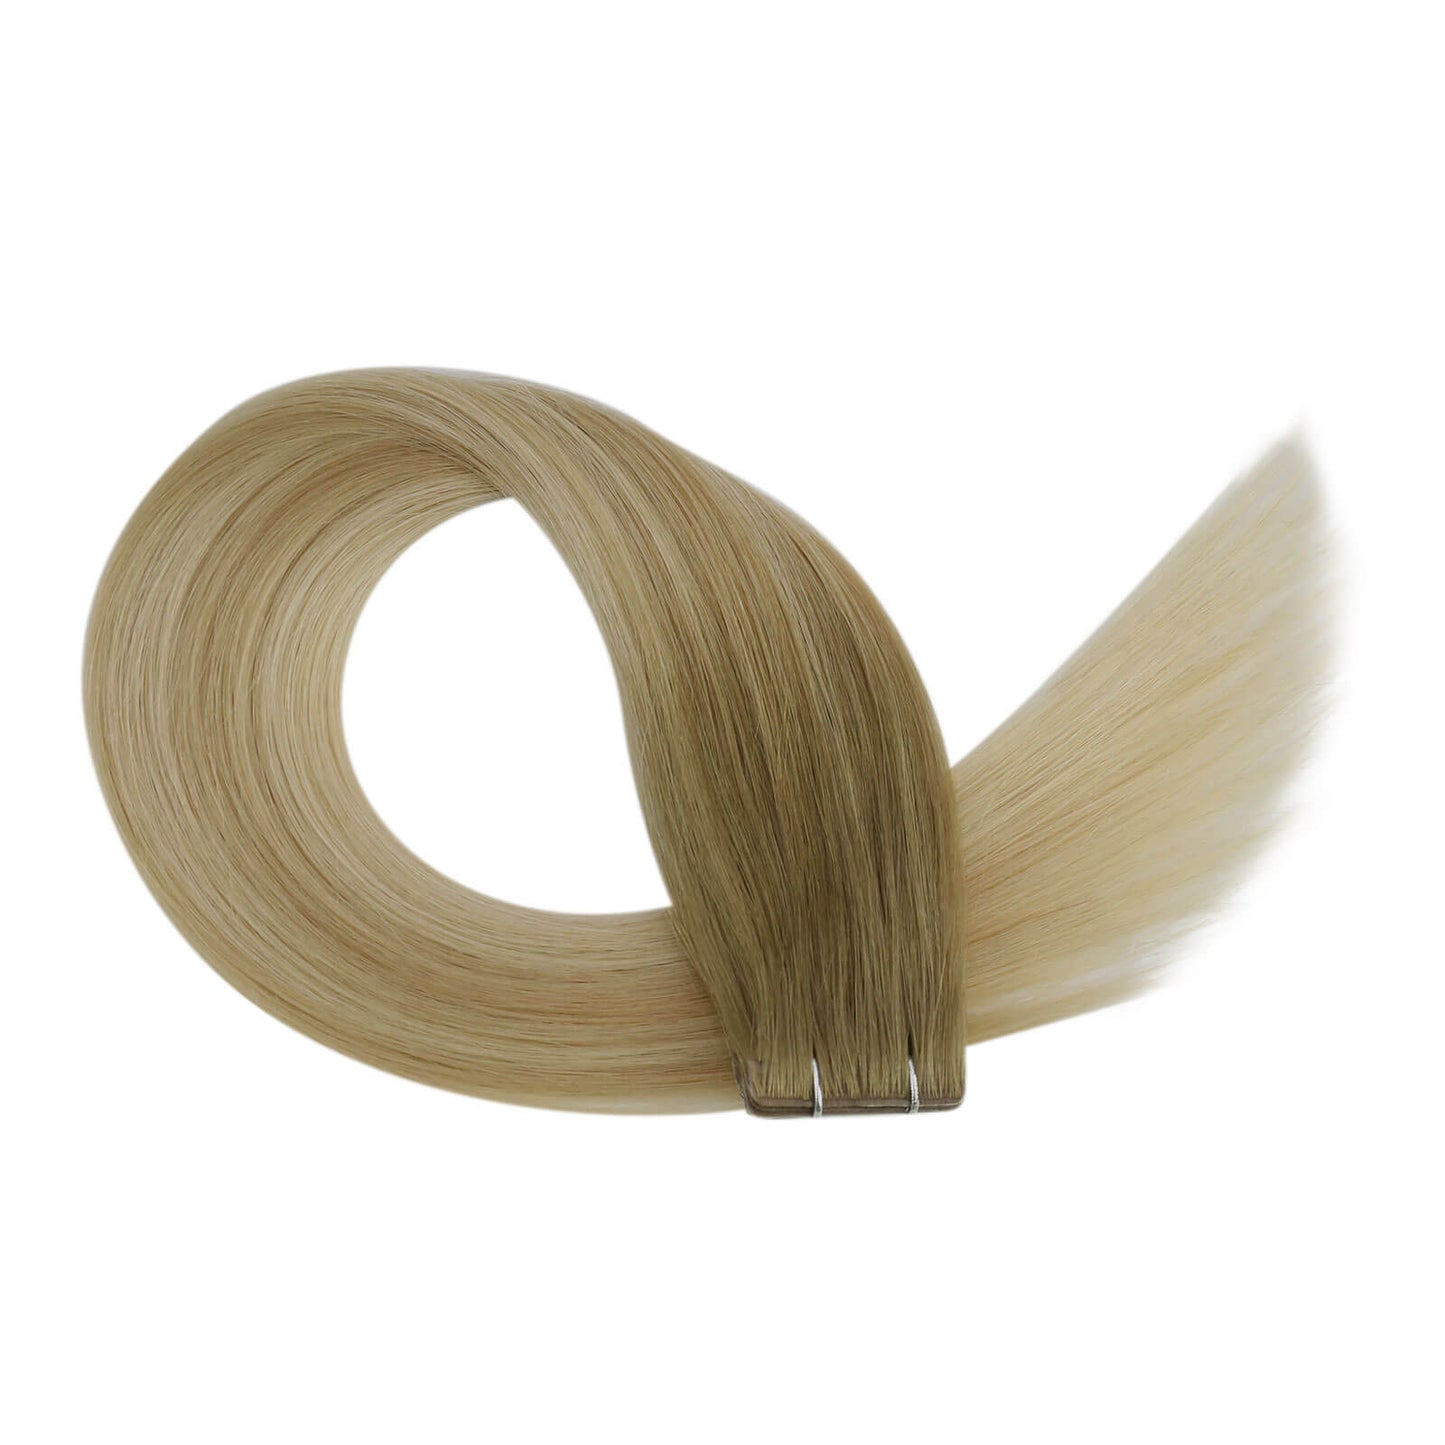 [Virgin+] Seamless Injected Tape in Extensions Light Brown With Blonde #8/27/60